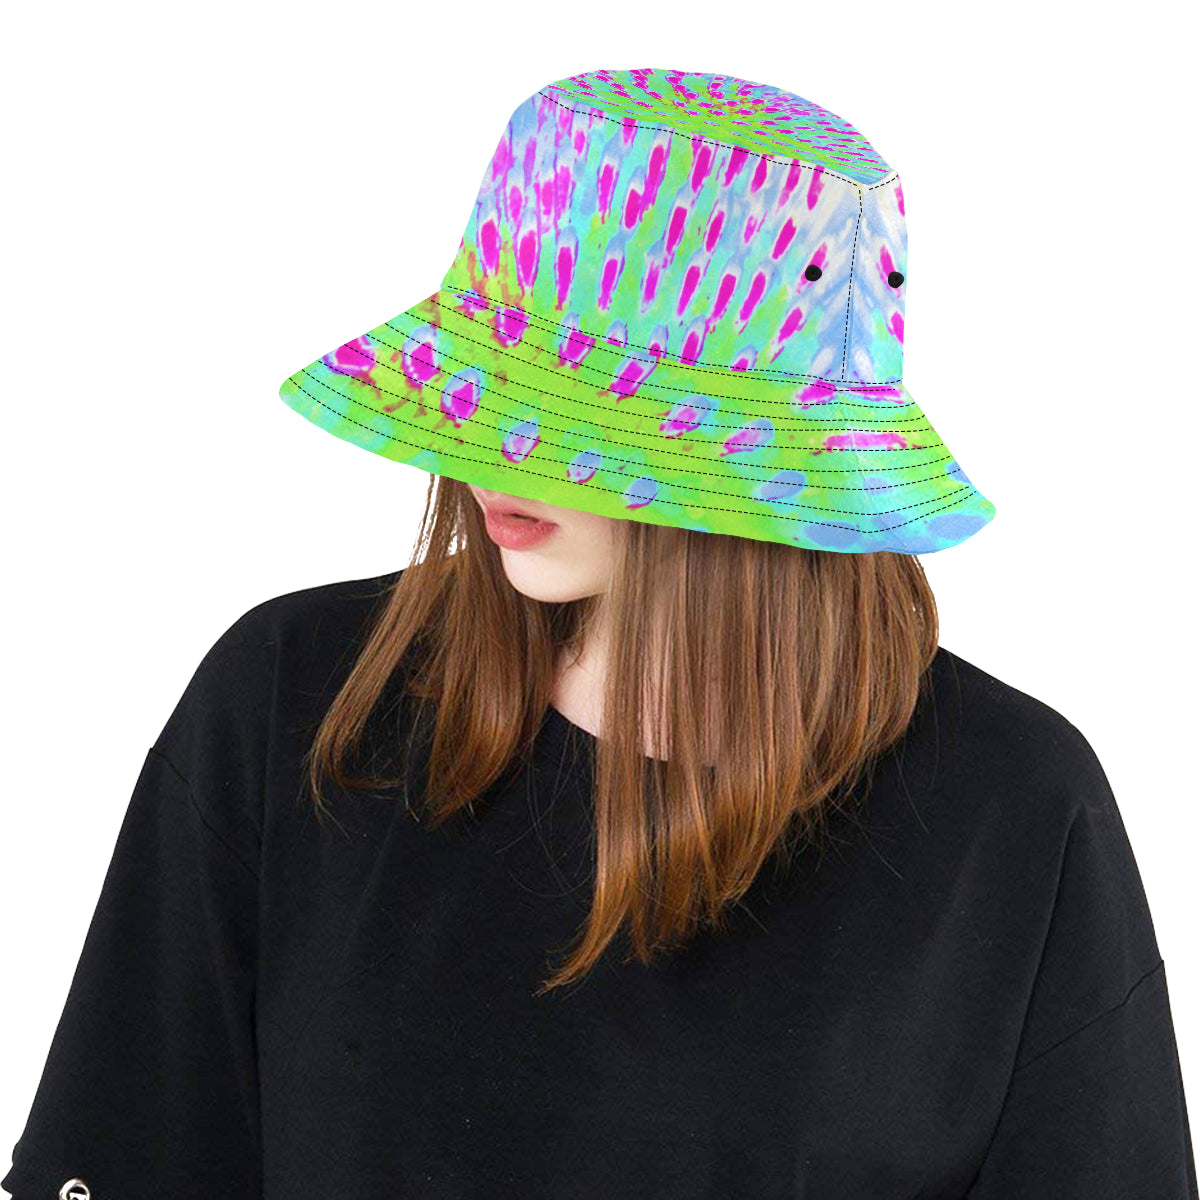 Bucket Hats, Lime Green and Purple Abstract Cone Flower